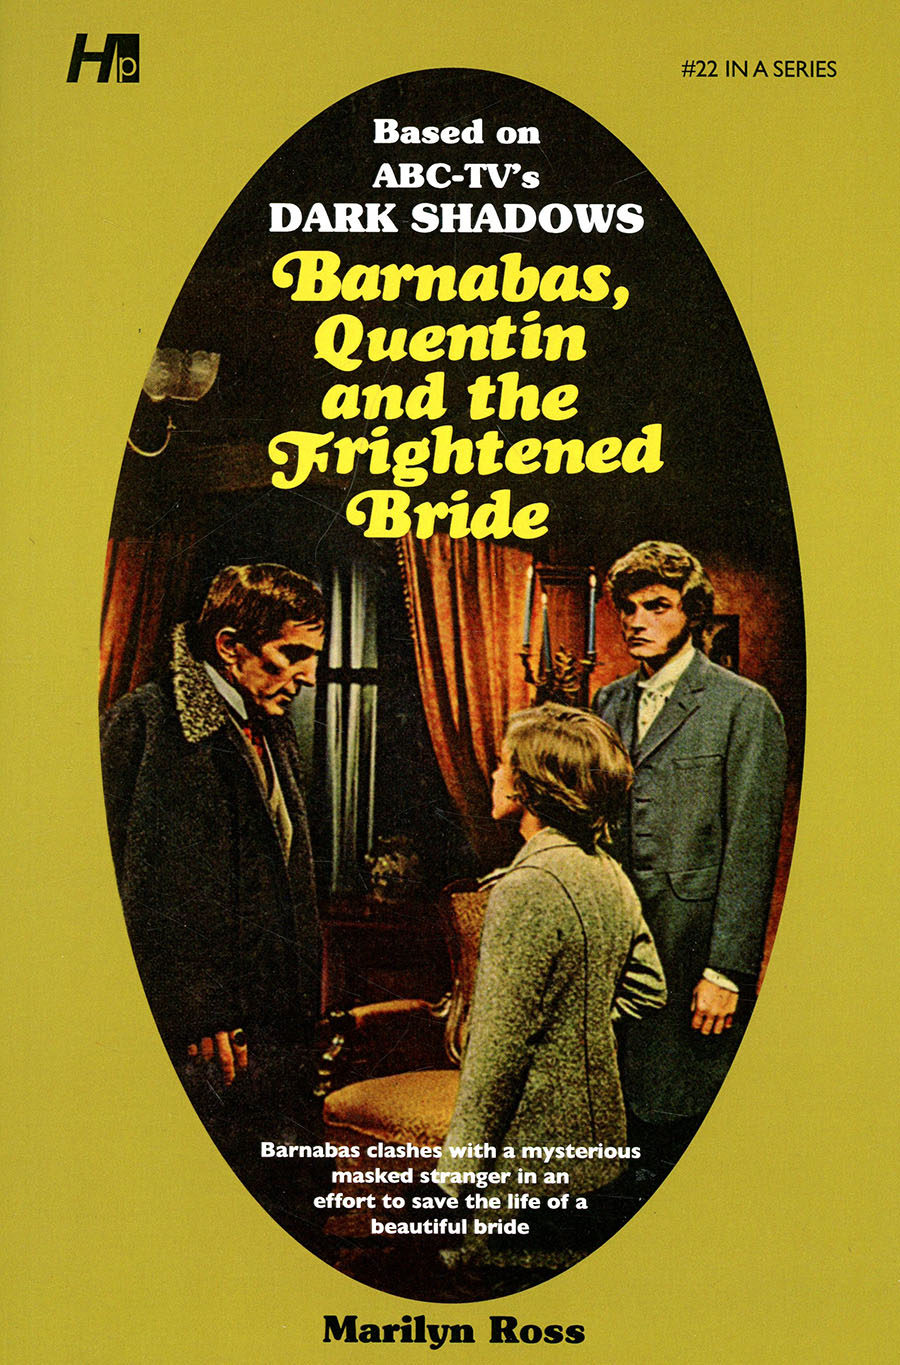 Dark Shadows Paperback Library Novel Vol 22 Barnabas Quentin And The Frightened Bride TP